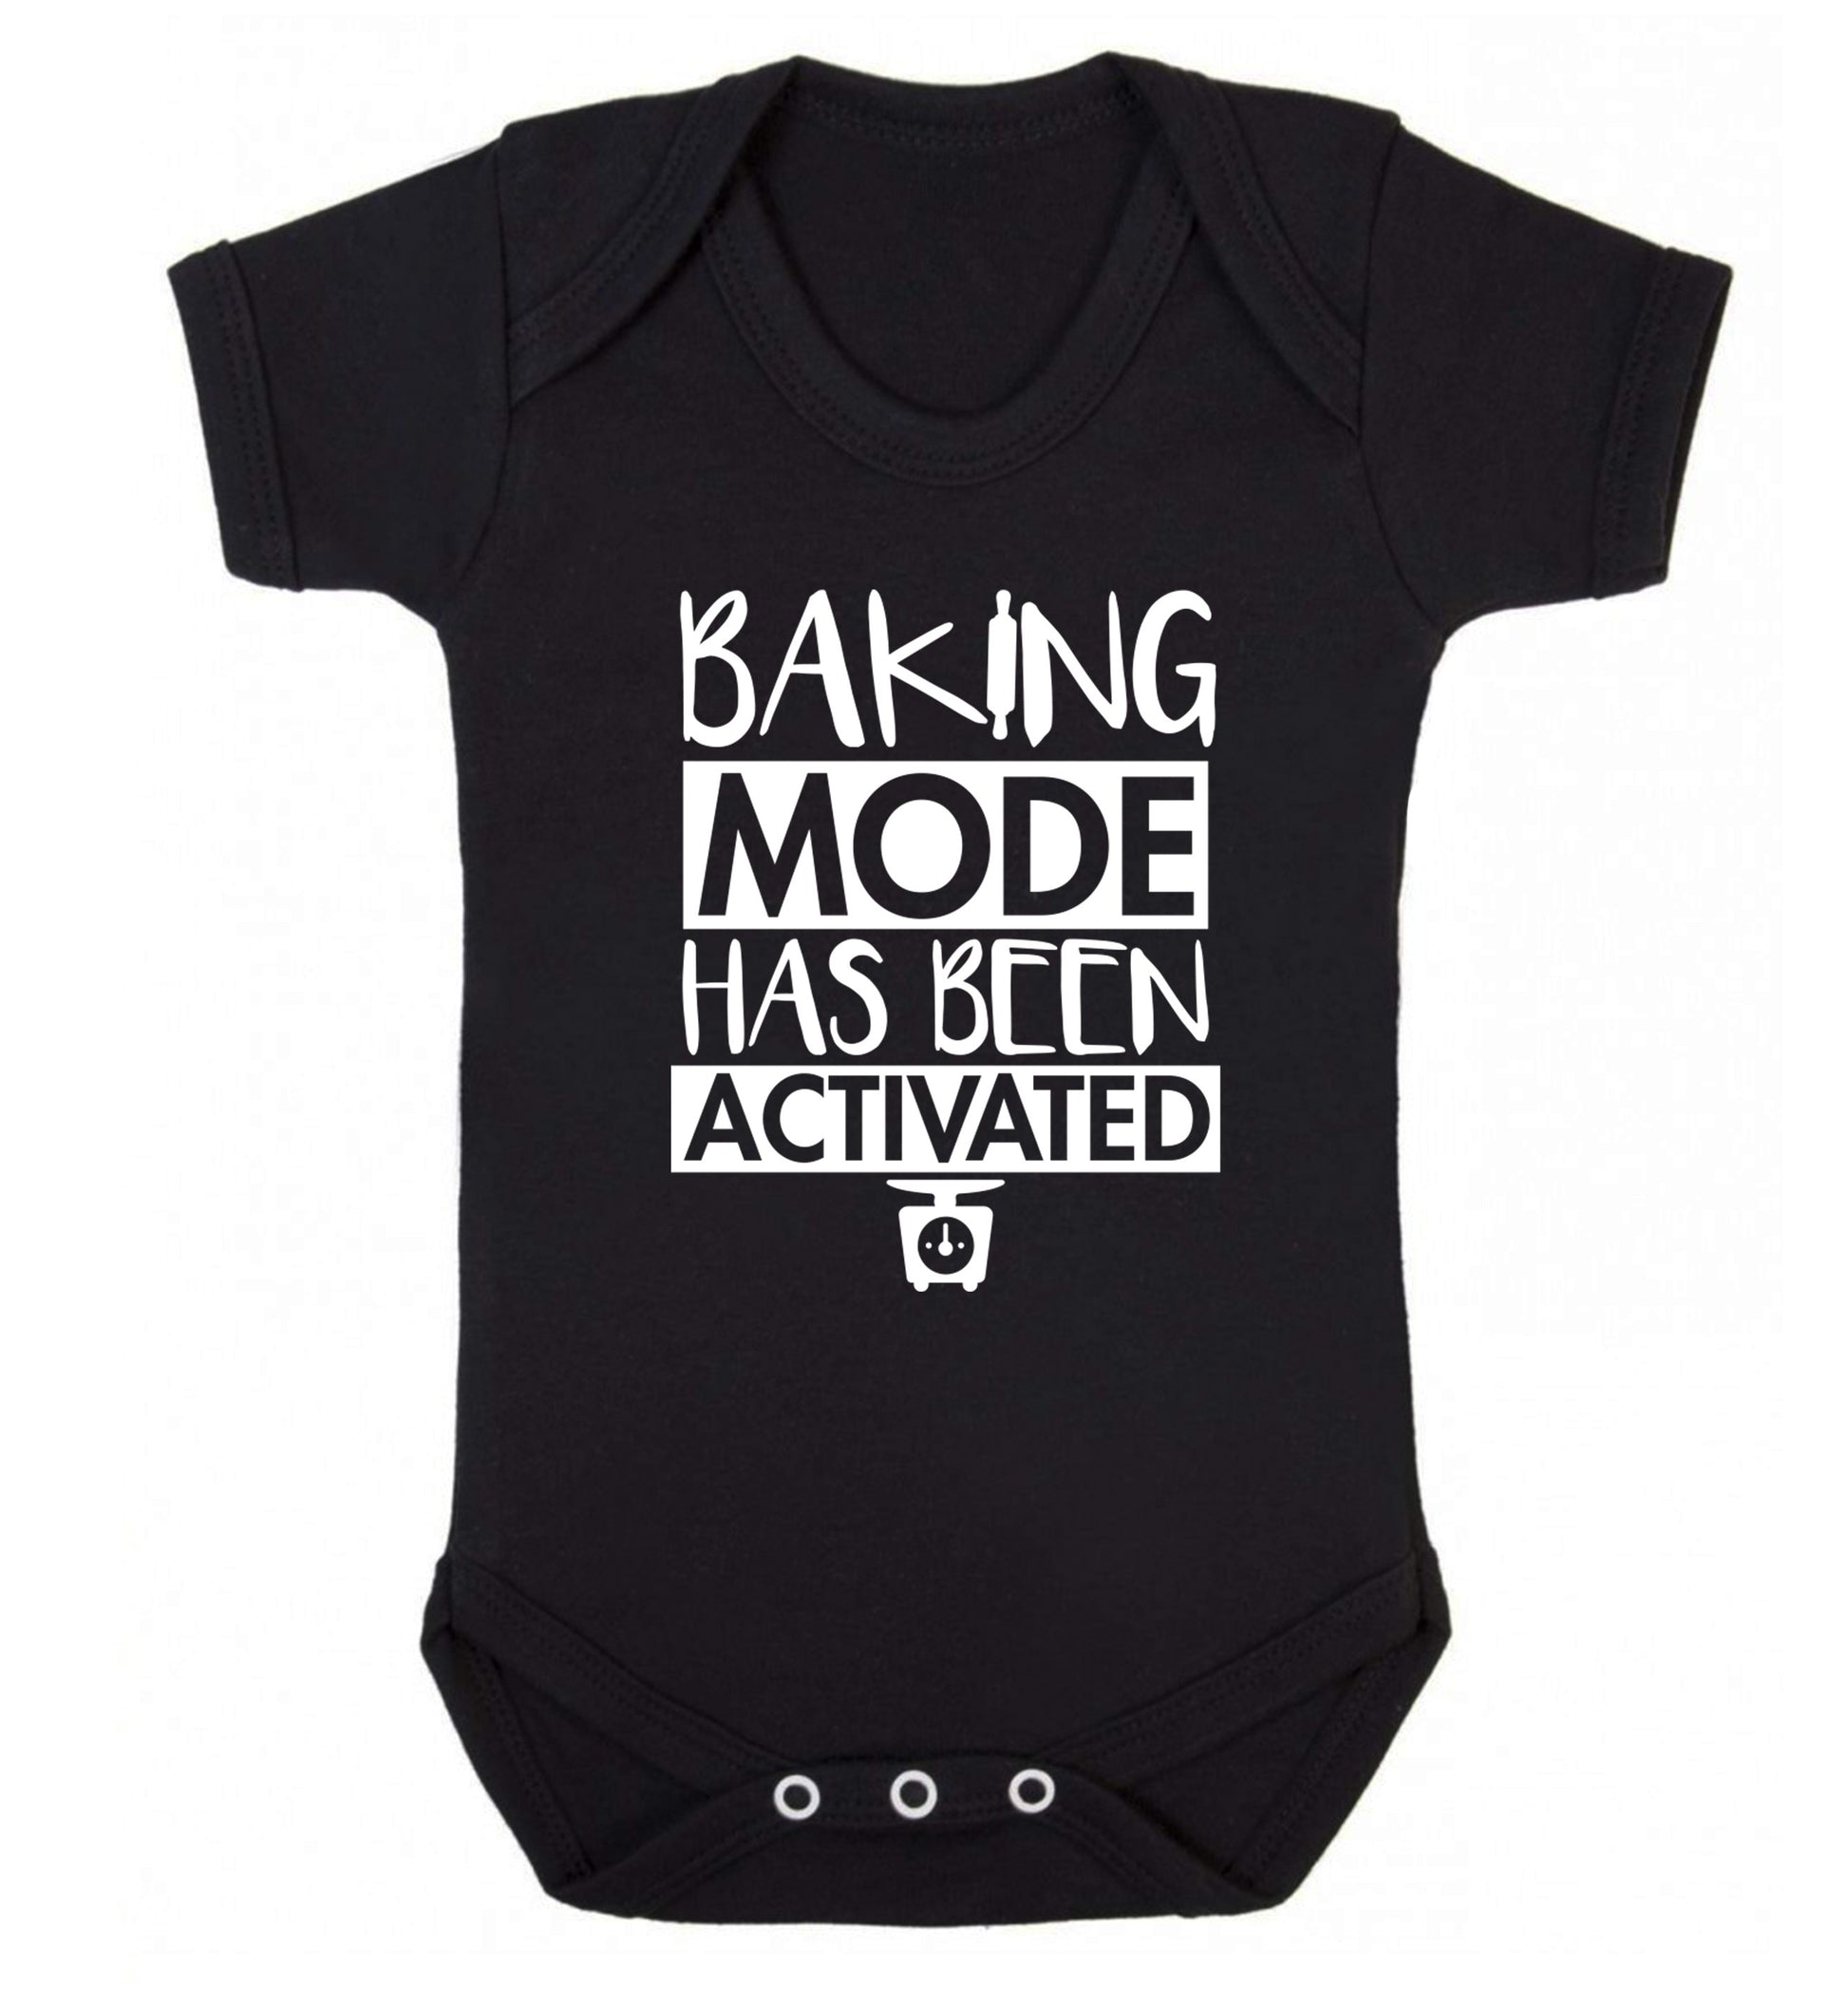 Baking mode has been activated Baby Vest black 18-24 months